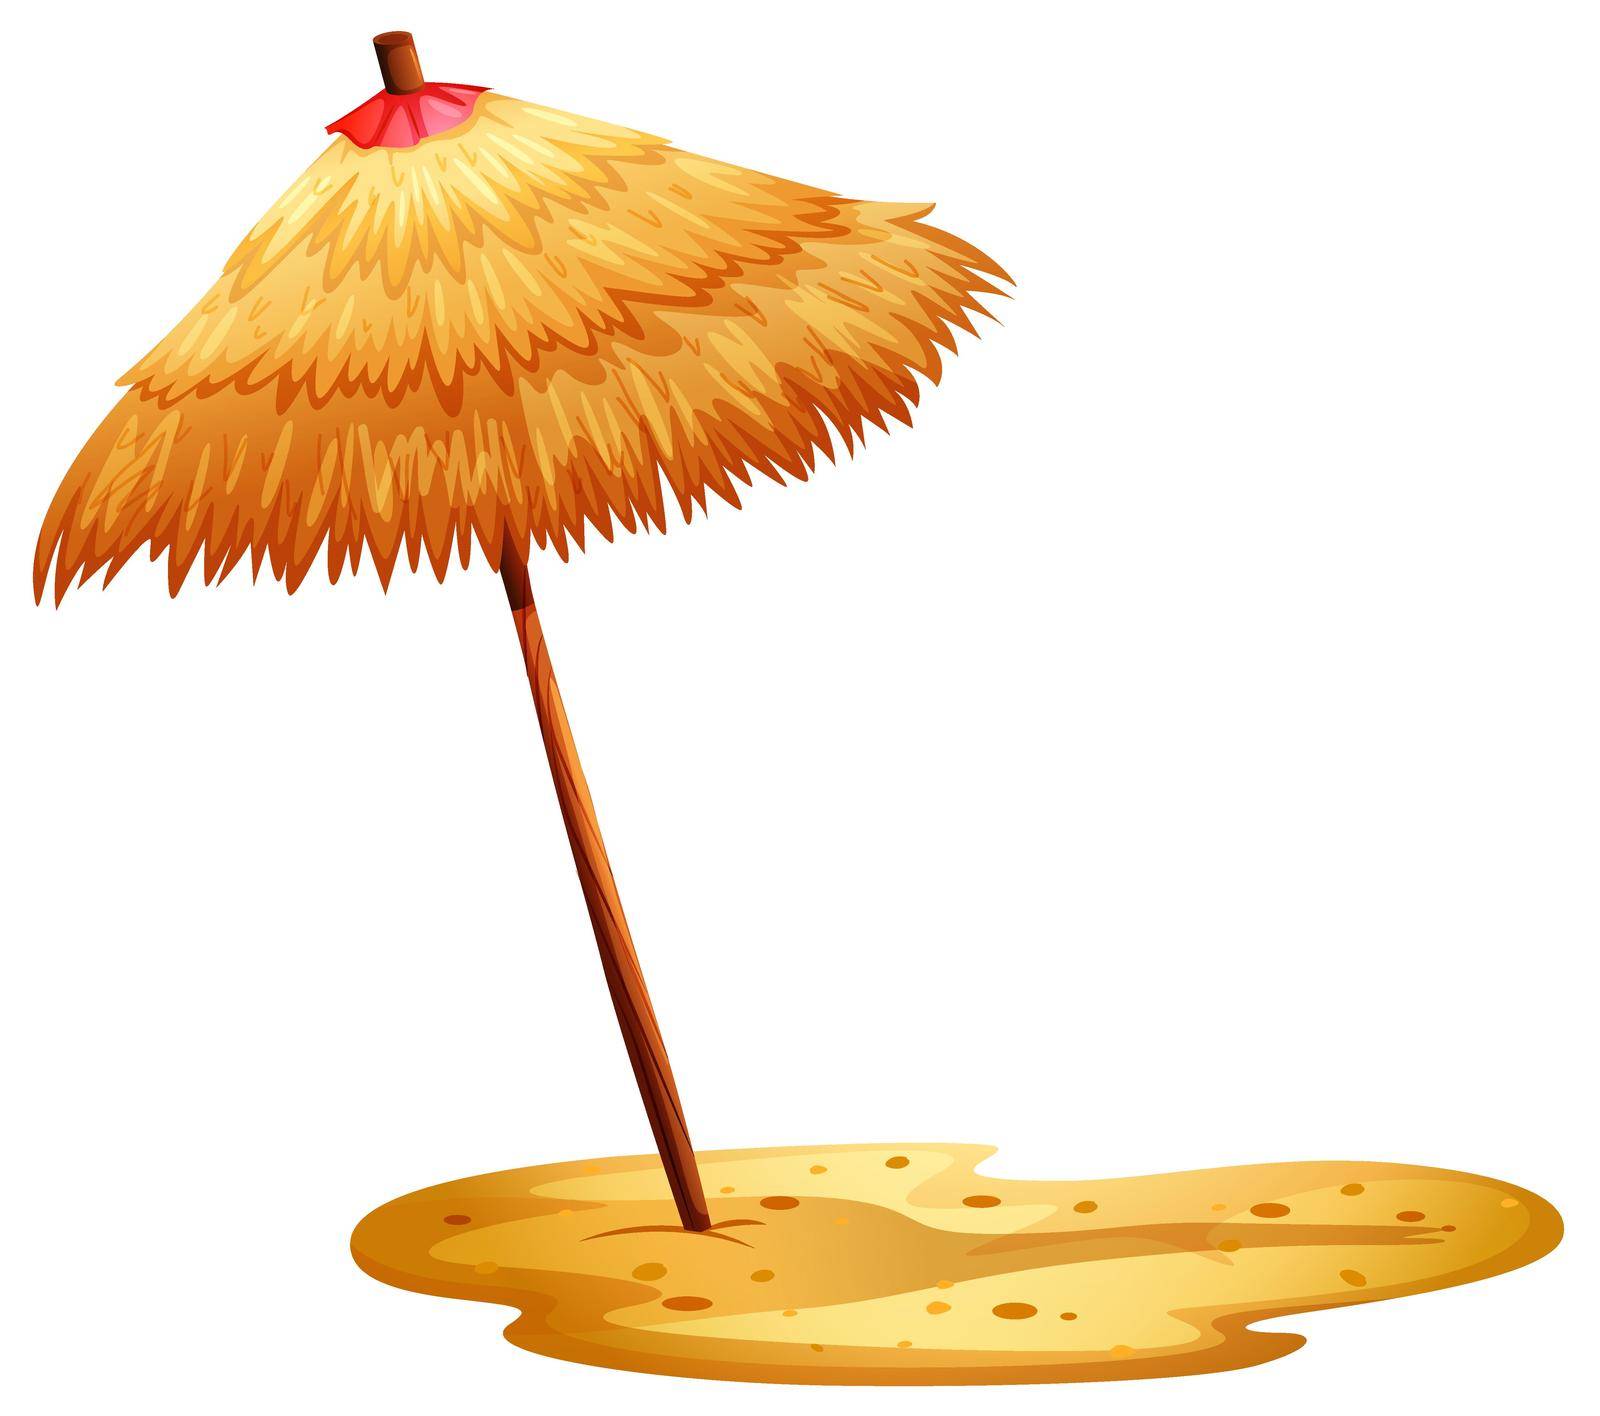 Illustration of a beach umbrella on a white background